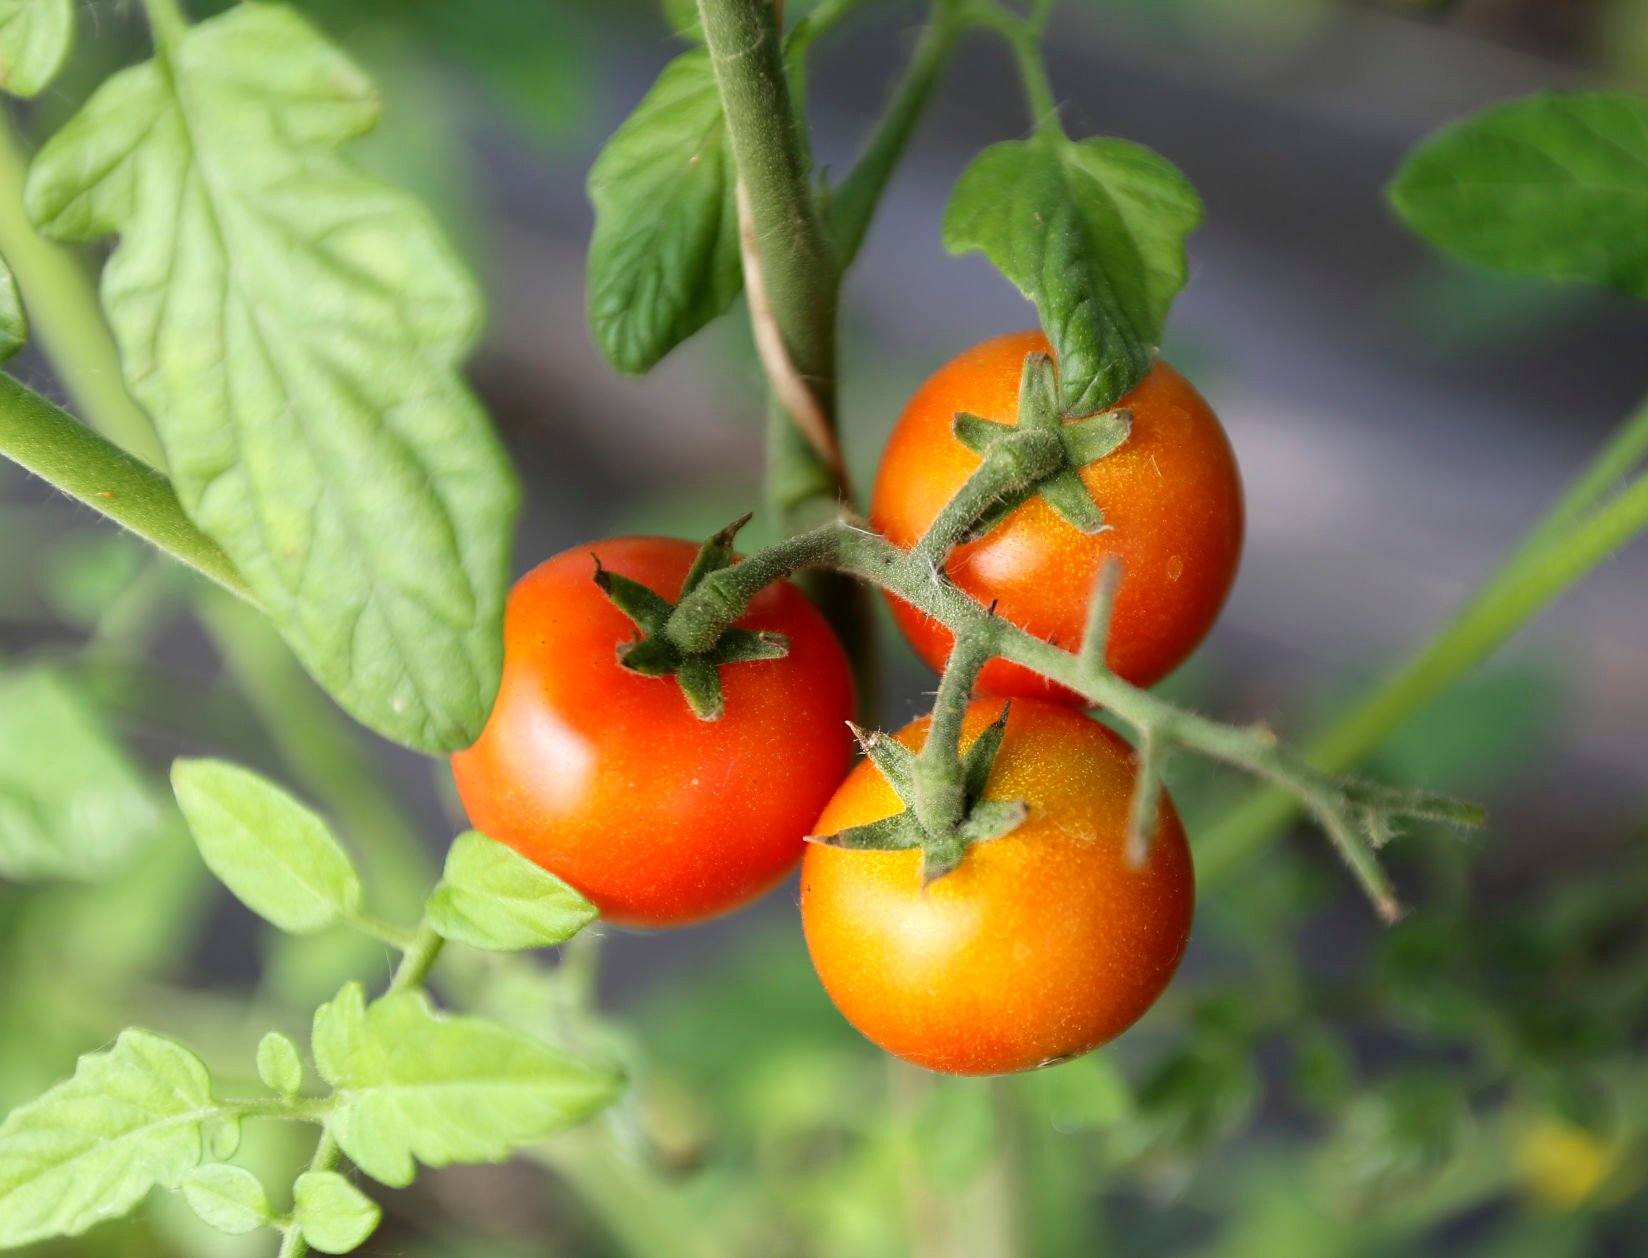 Tomatoes begin to ripen on the vine.    PHOTO CREDIT: Dave Kettering